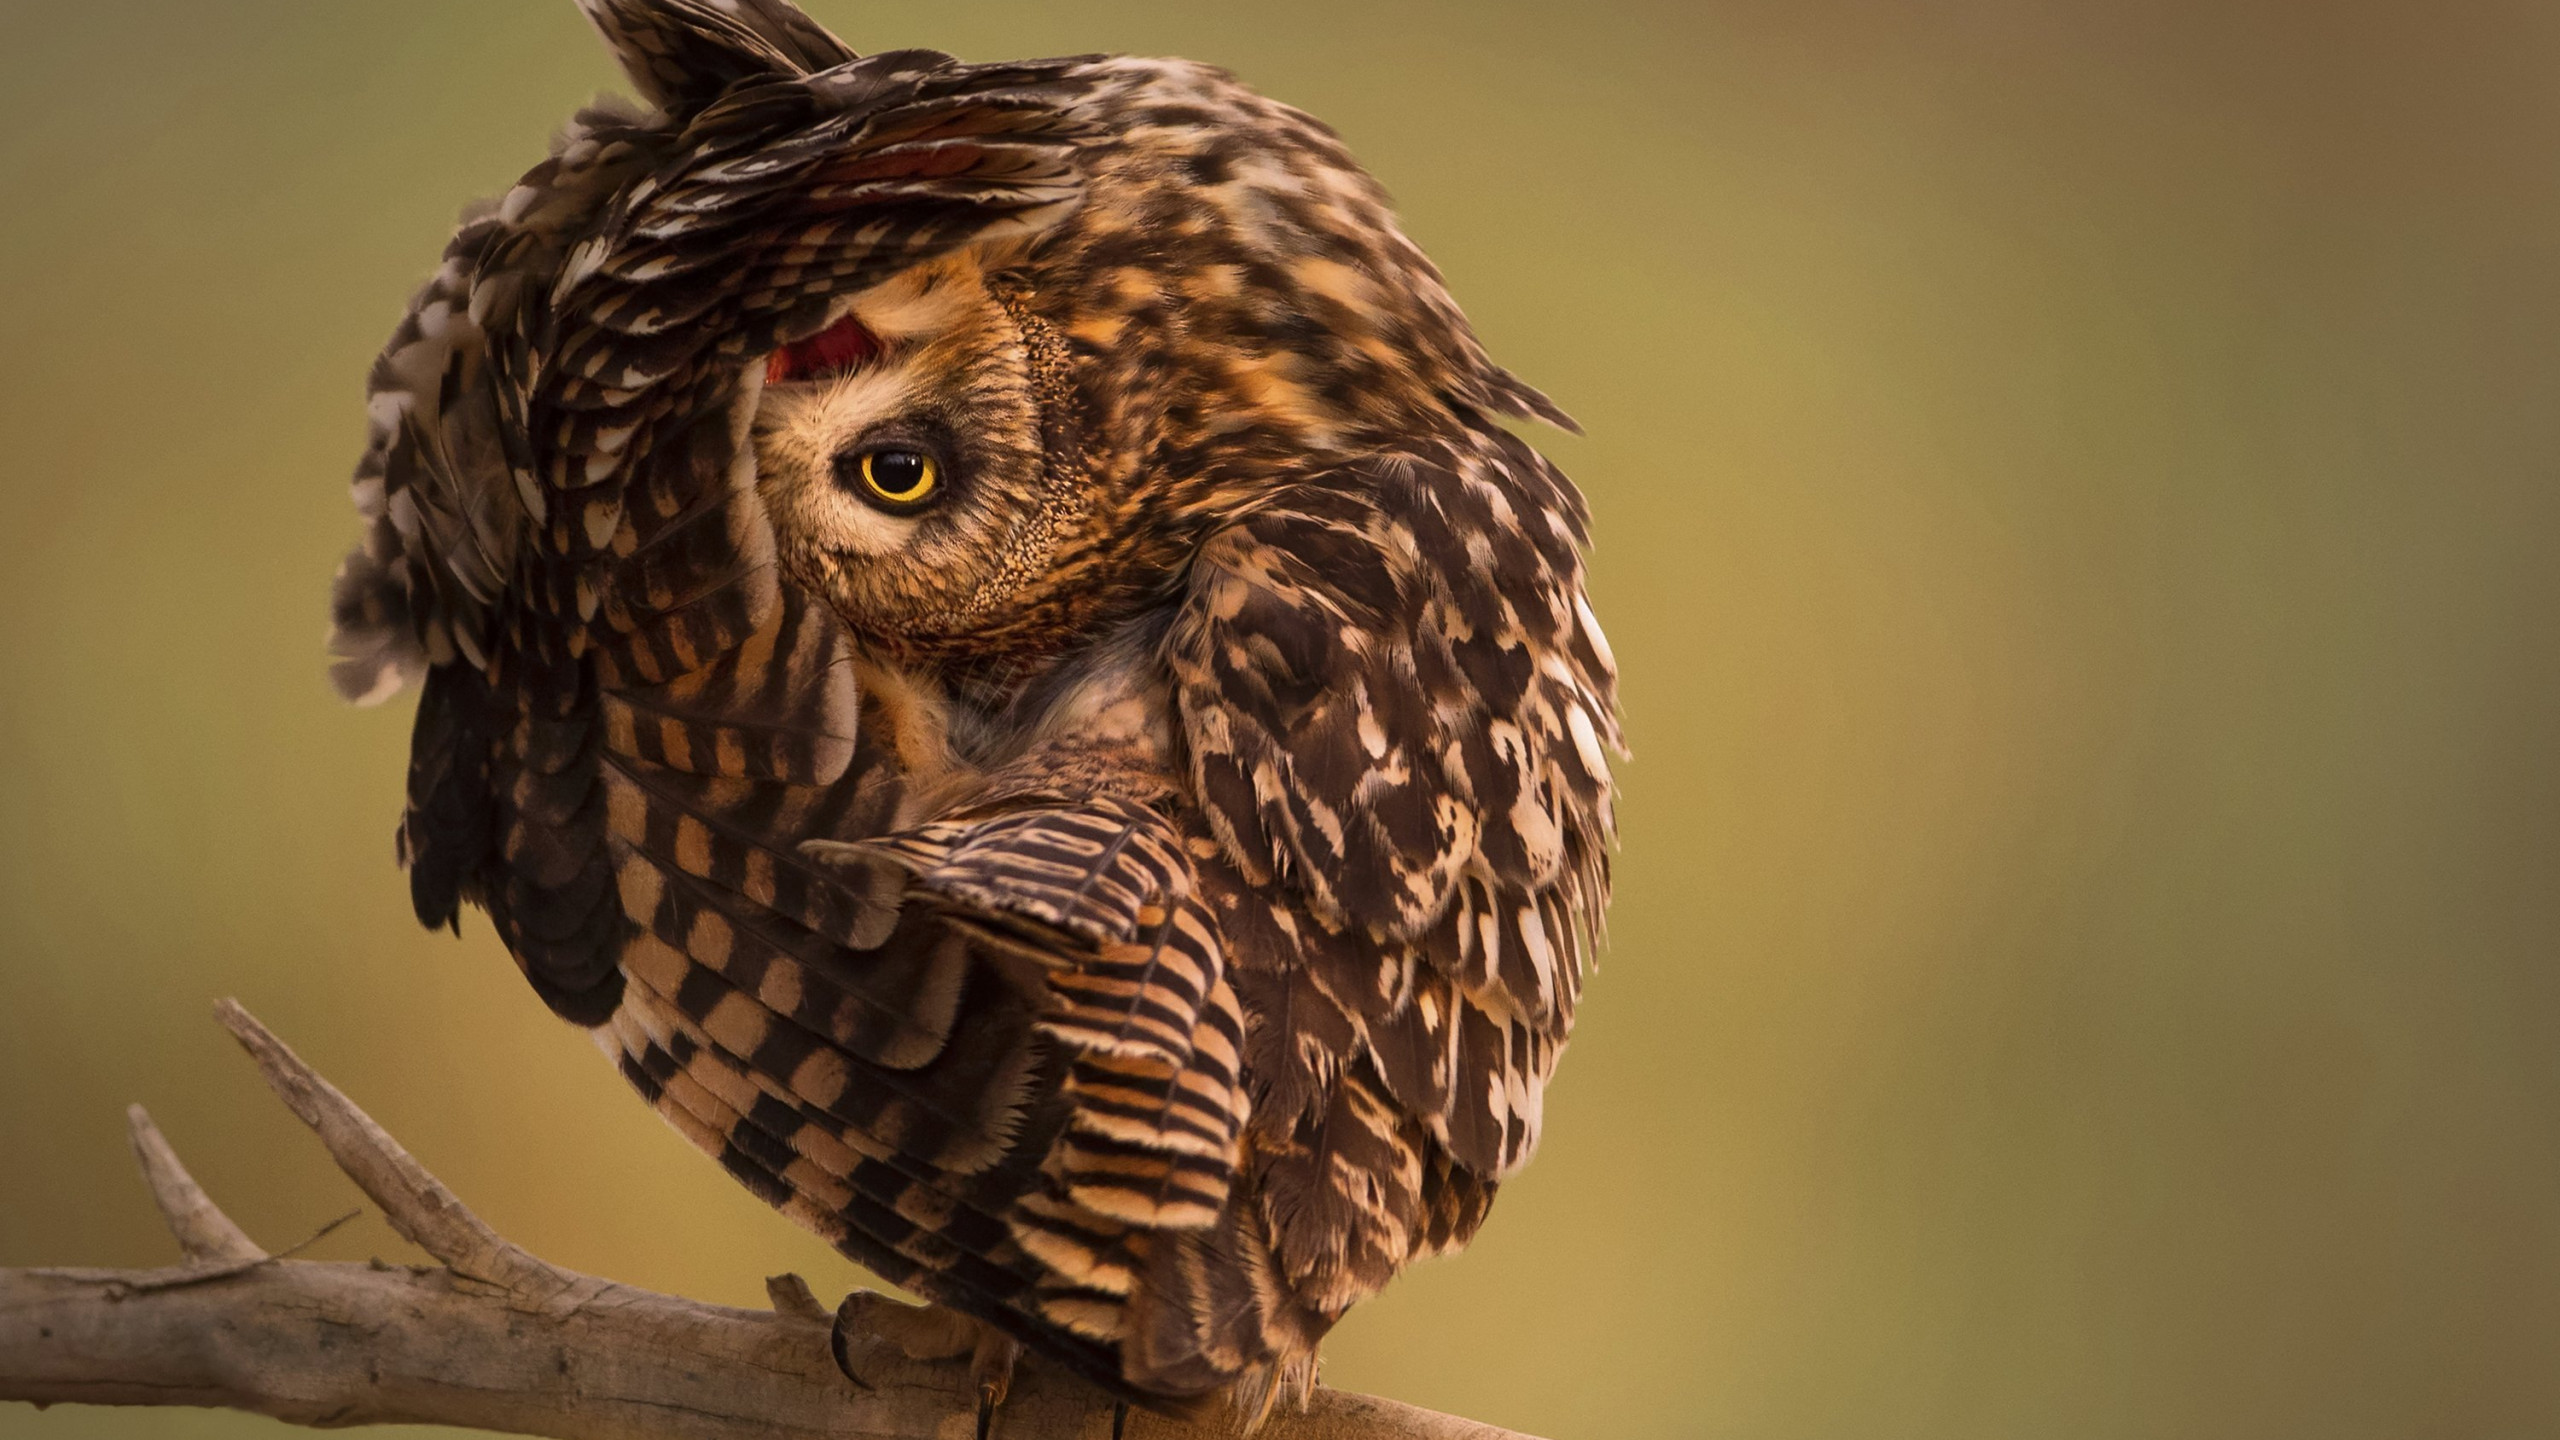 Wallpaper National Geographic, 4k, HD wallpaper, Owl, Funny, OS #149